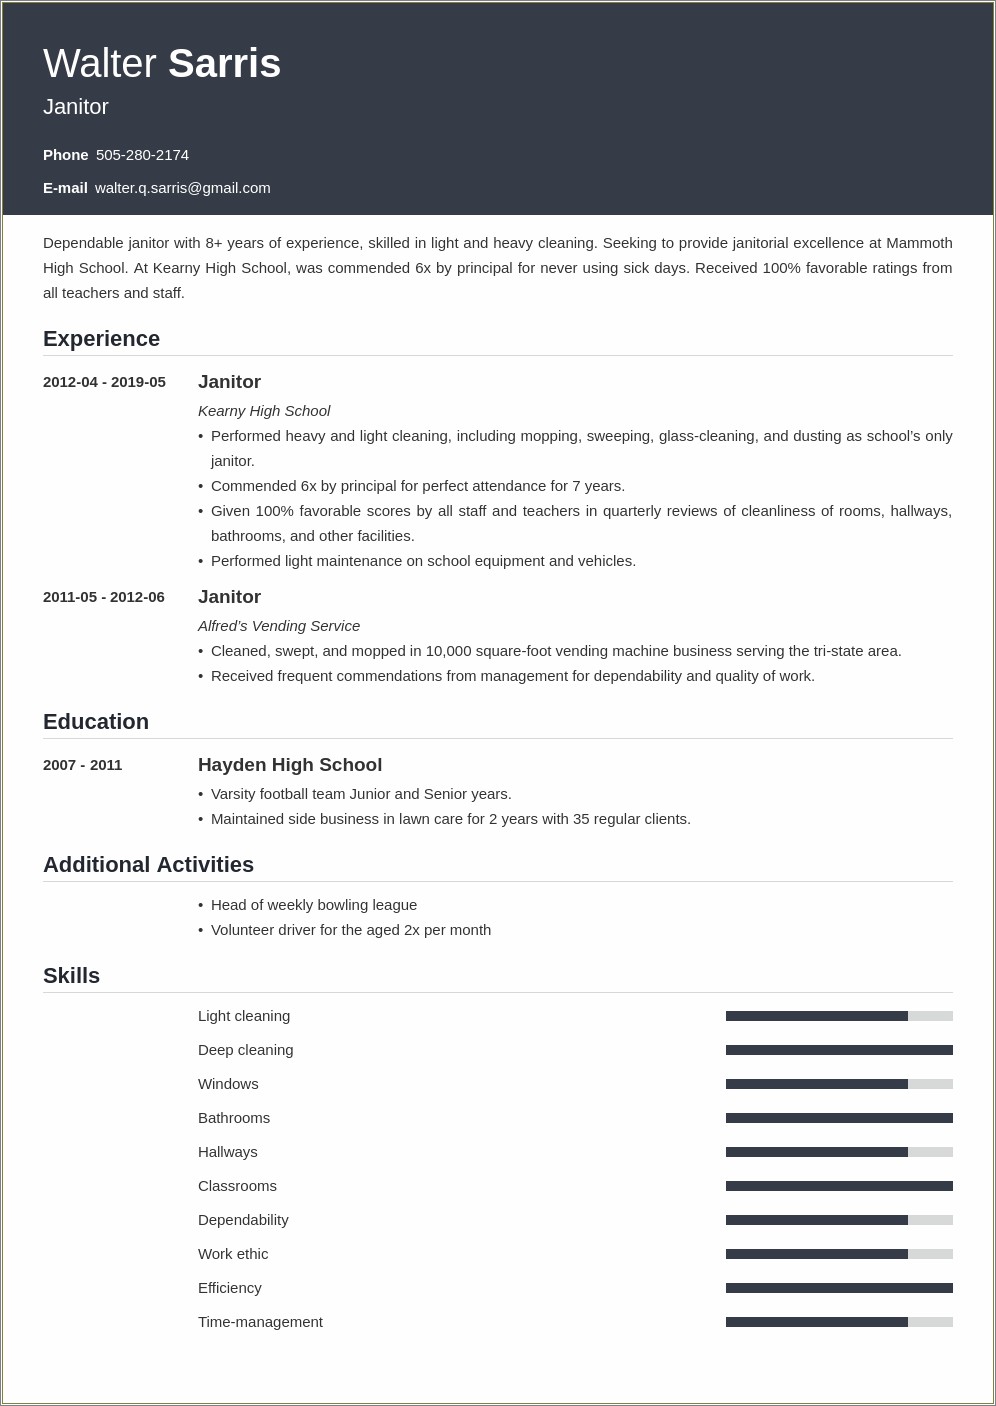 Free Resume Template For Maintenance Janitoral Worker